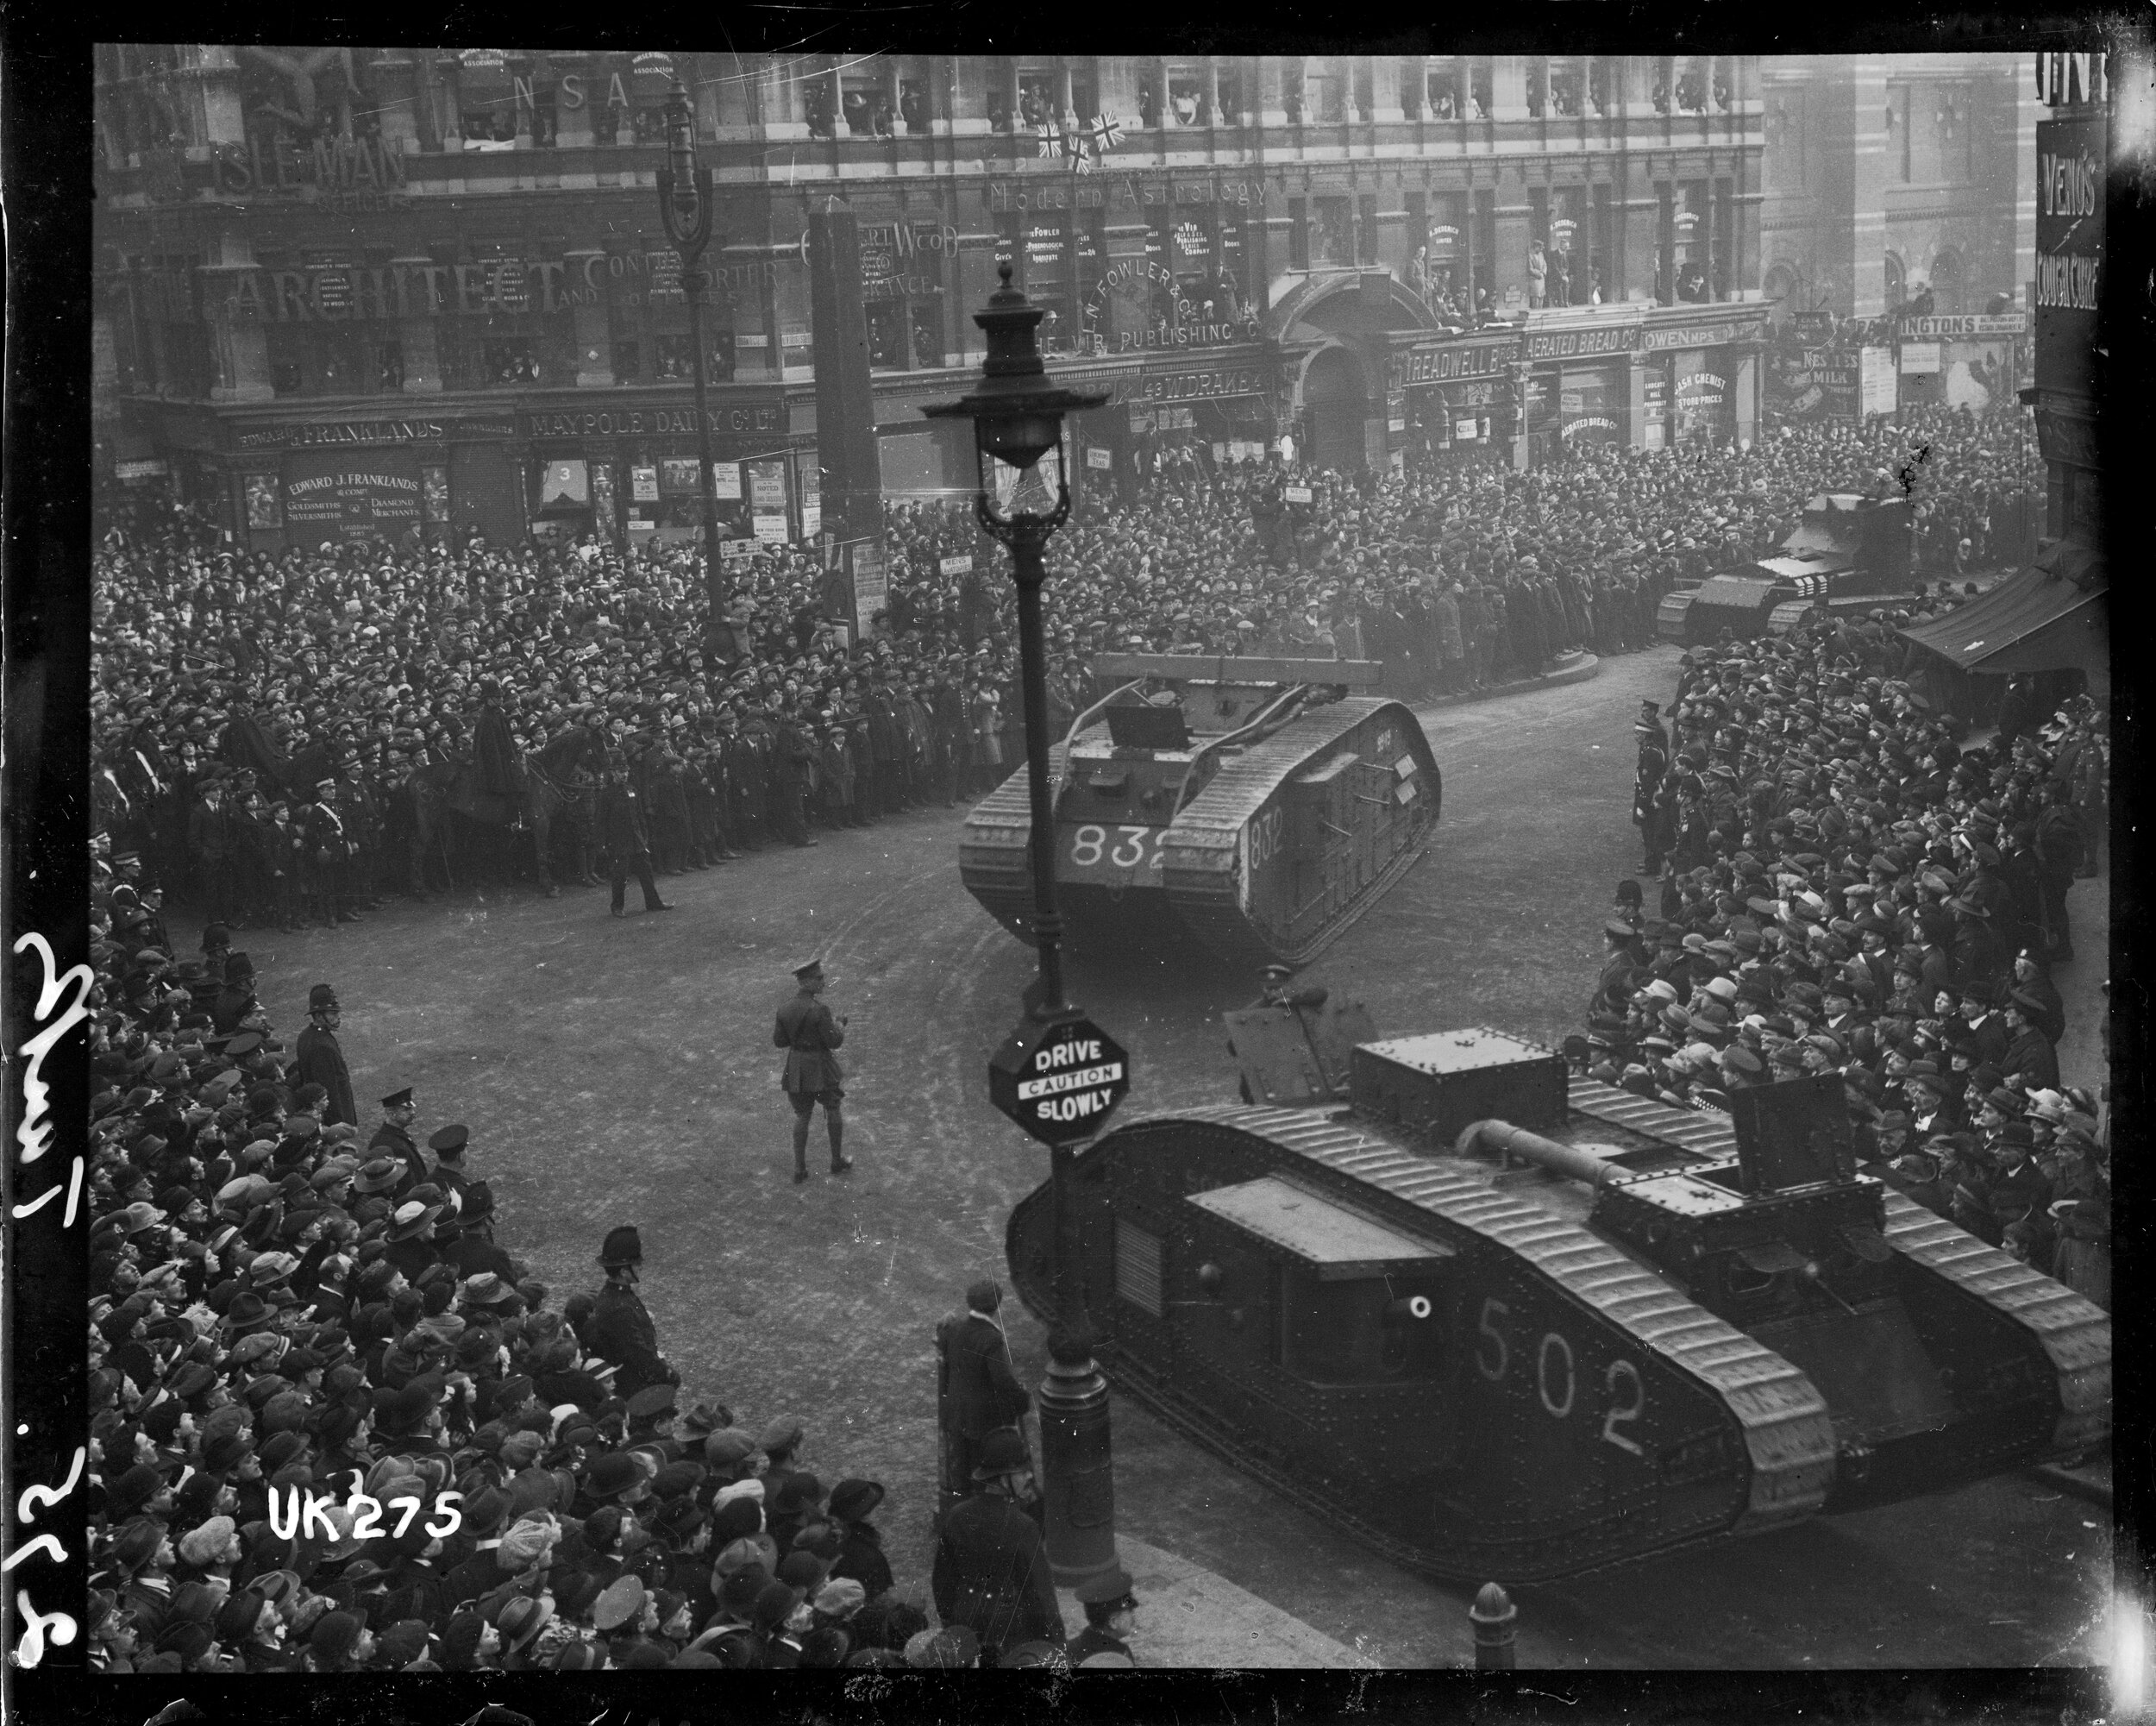  Tanks on parade in London at the end of World War I, 1918. 